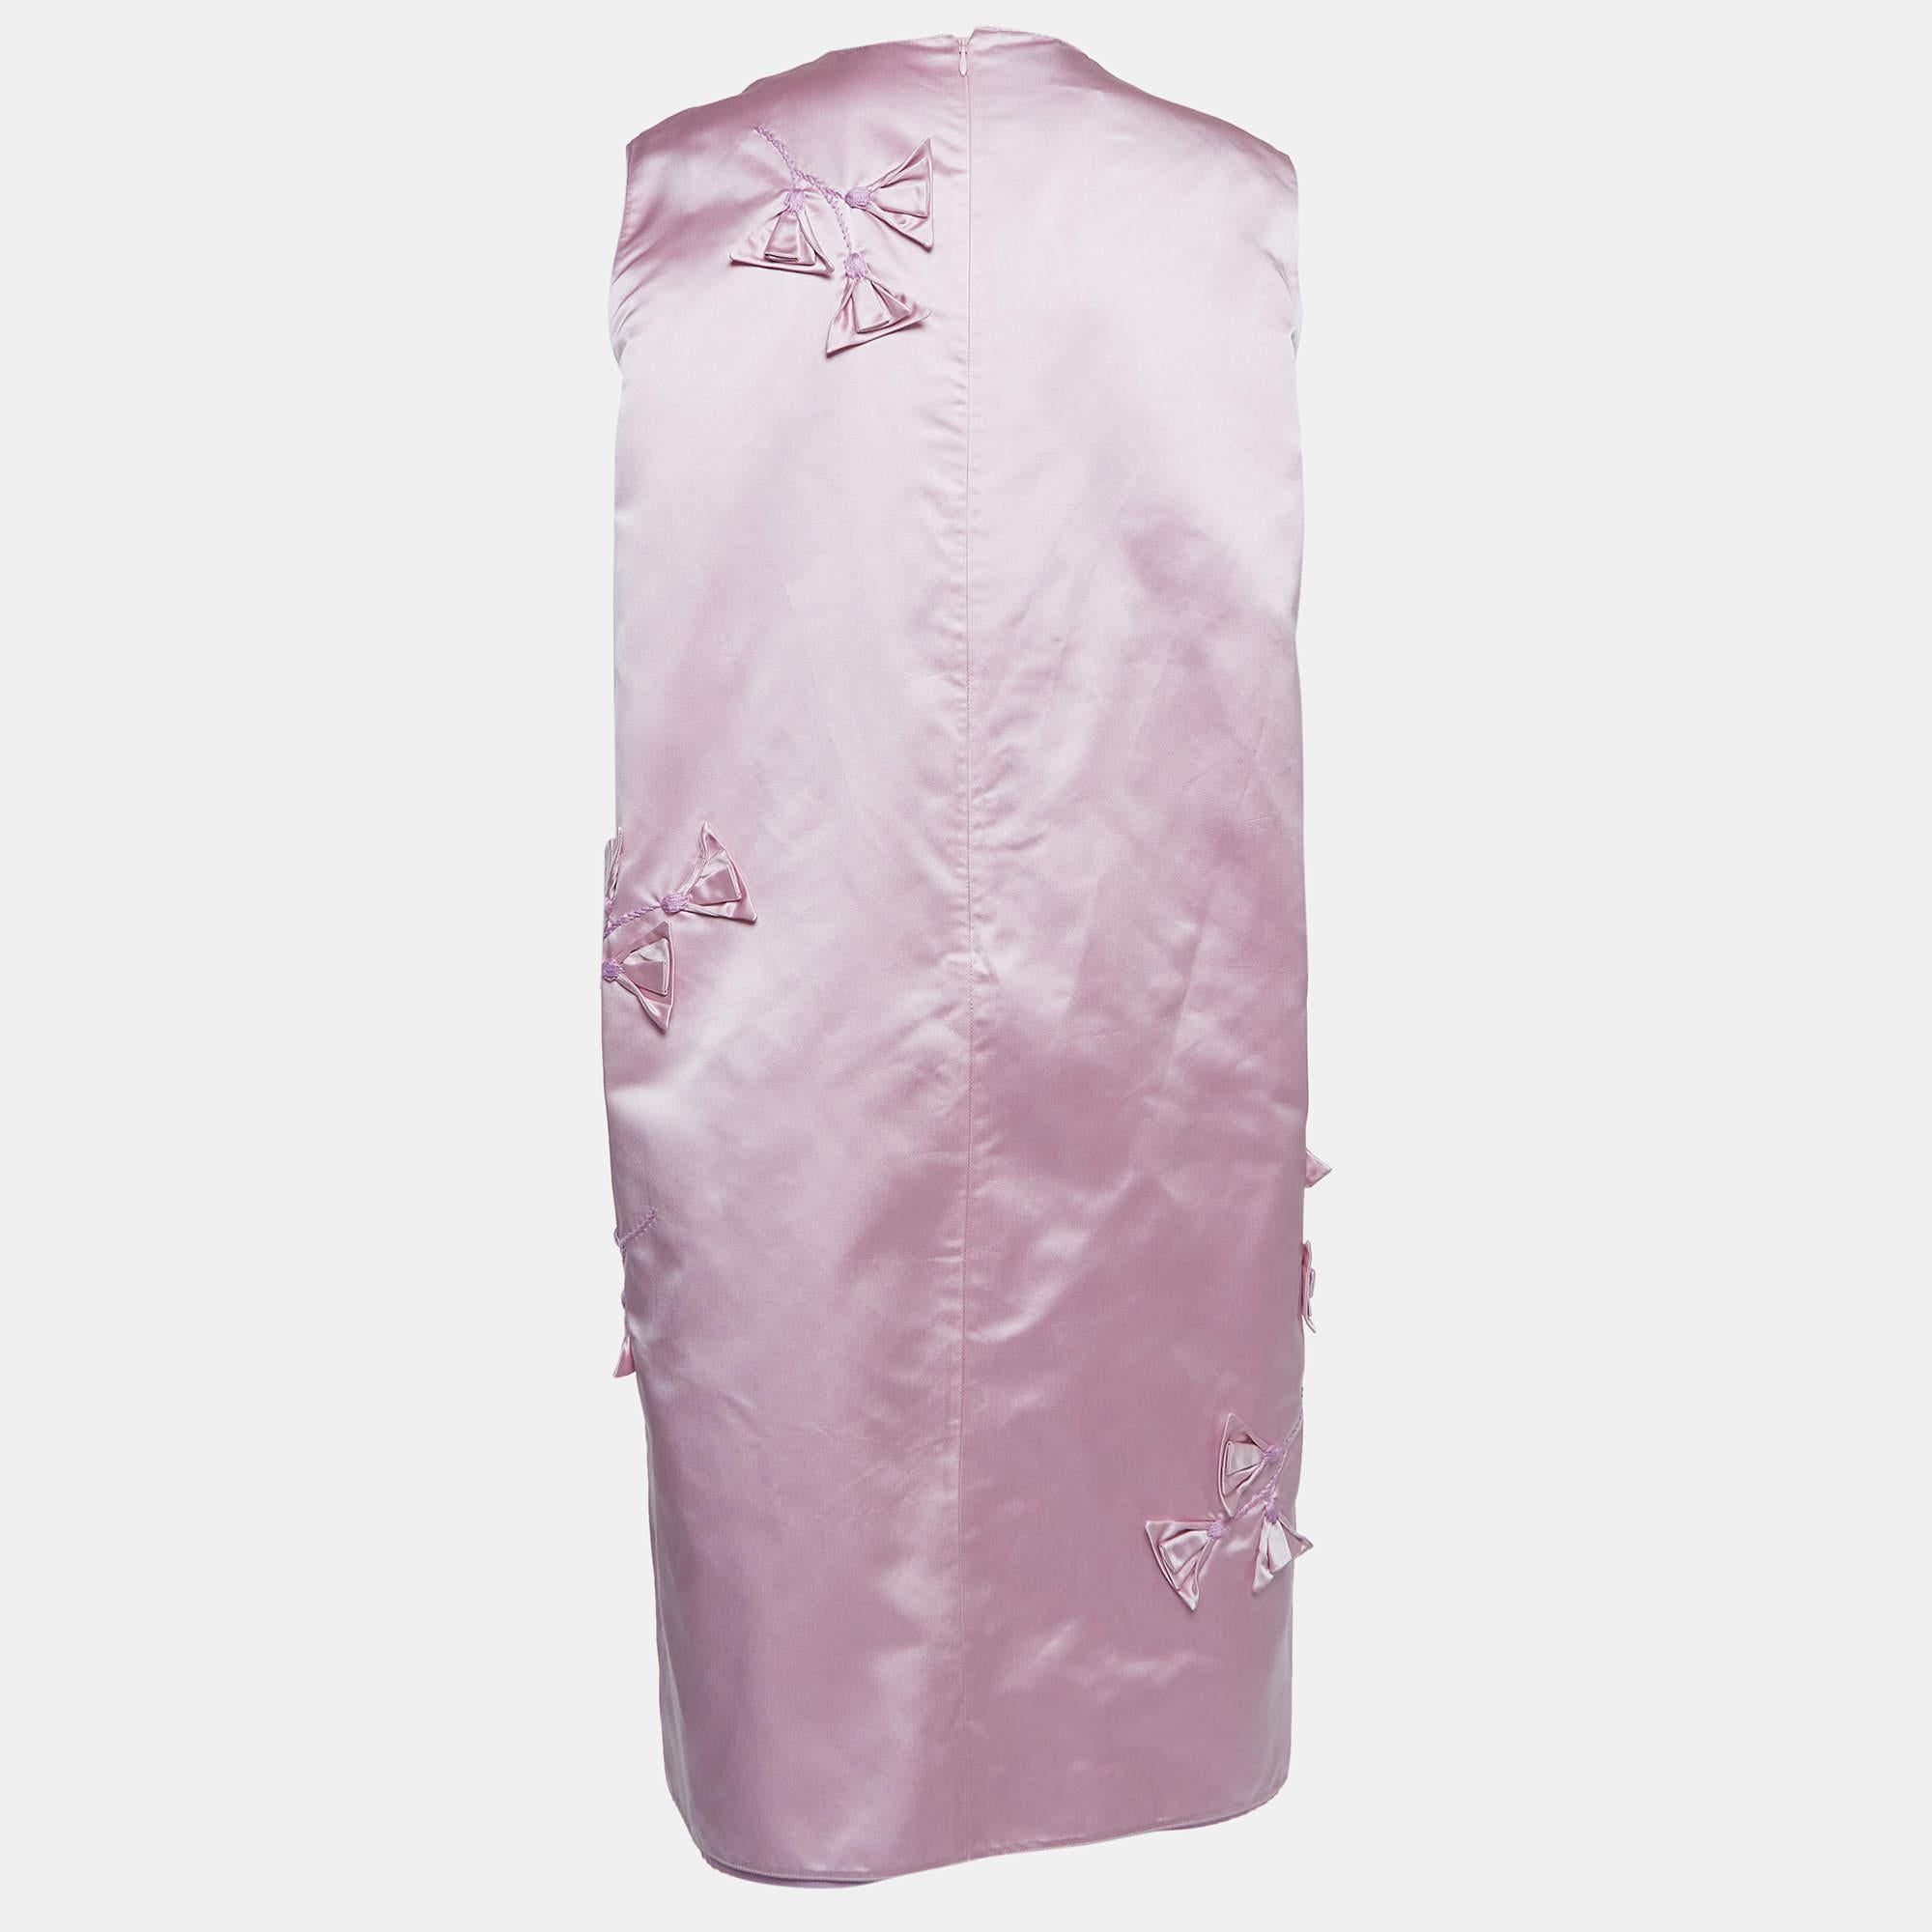 The Prada dress is a stunning piece featuring intricate floral appliques on luxurious silk fabric. With a duchess shift silhouette, it exudes elegance and modernity, making it a sophisticated choice for special occasions with its vibrant pink hue